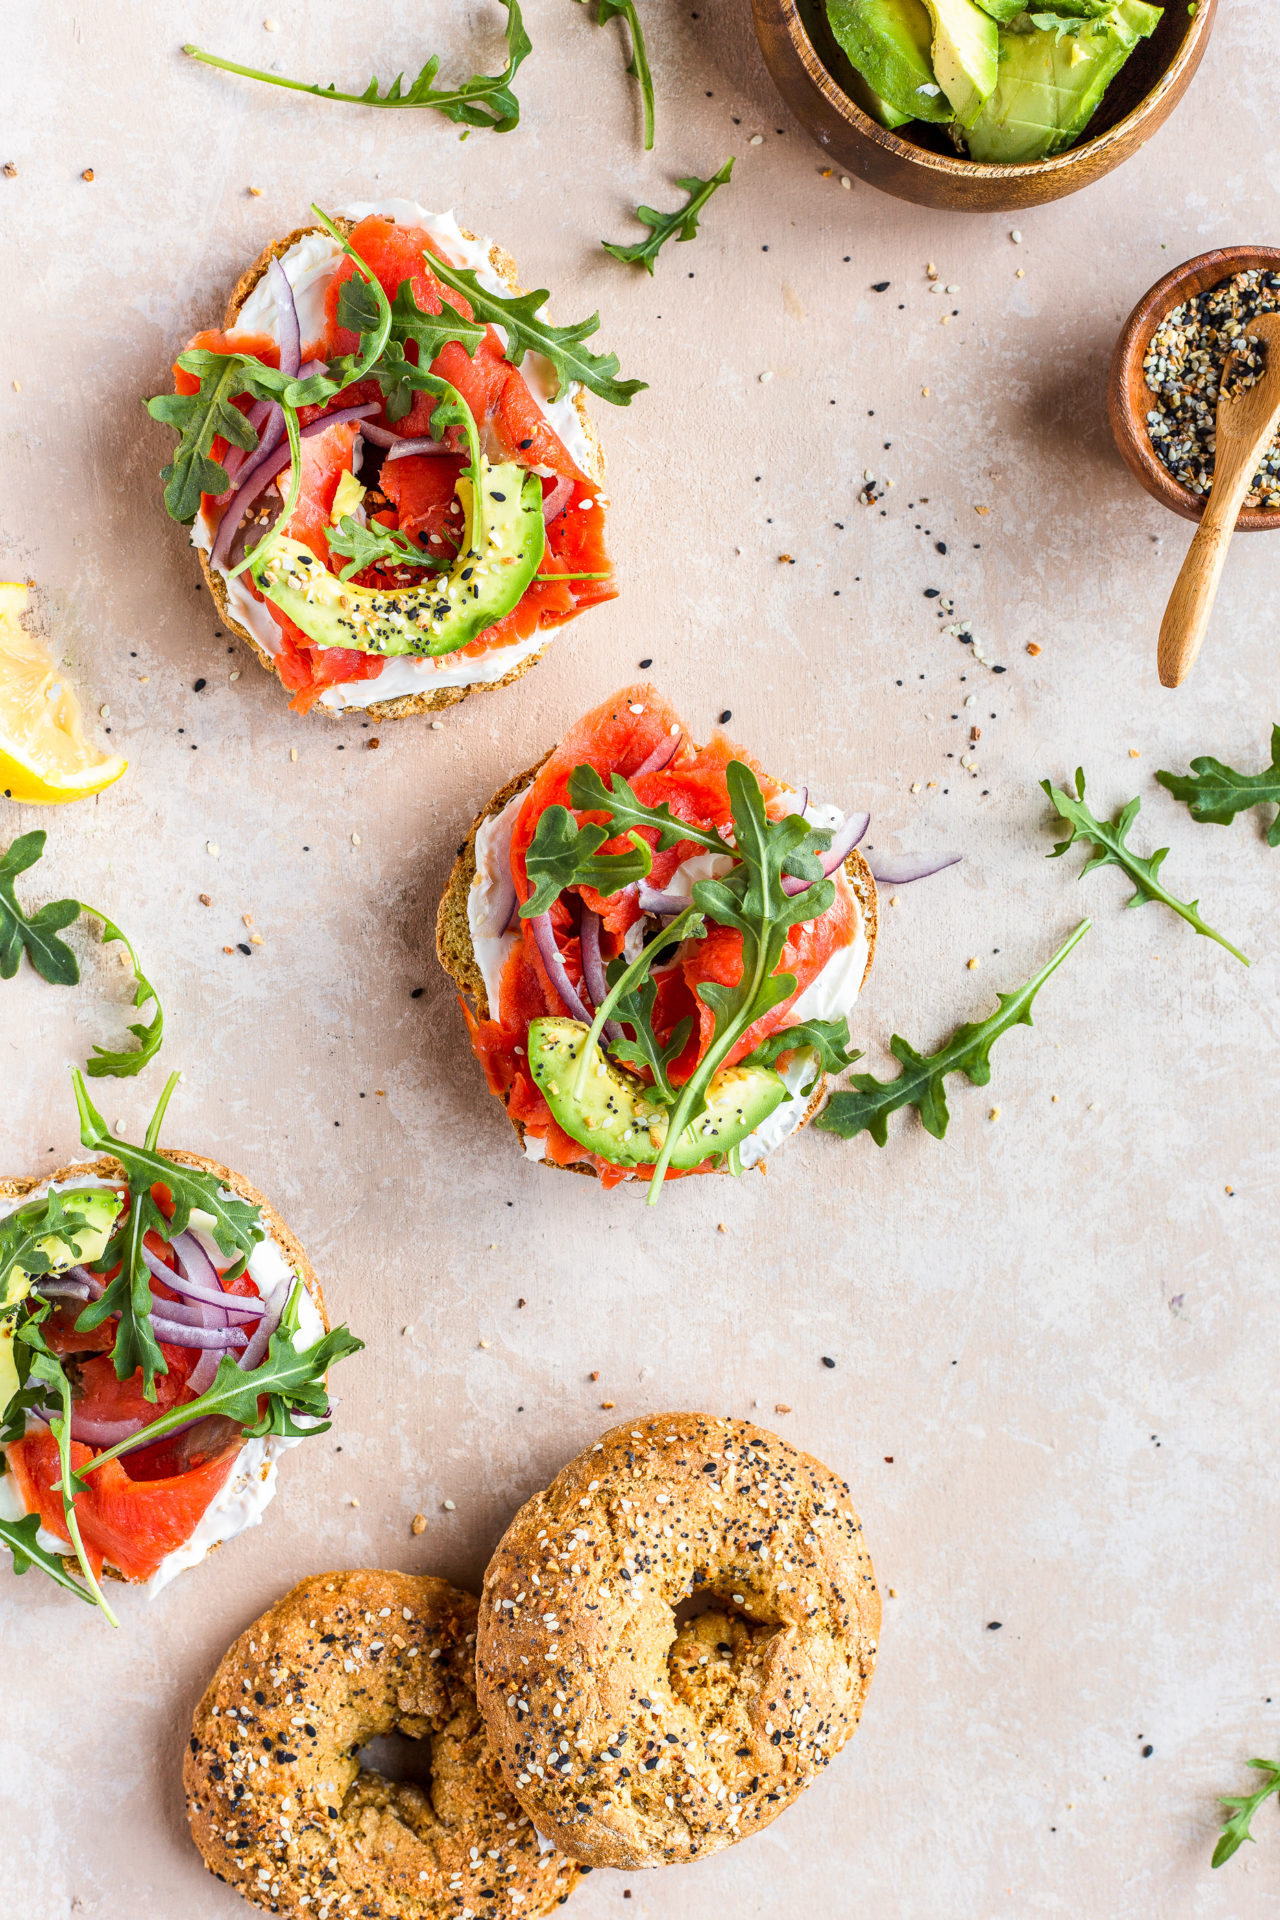 Healthy Homemade Bagels with Almond Cream Cheese, Smoked Salmon, Avocado and Arugula